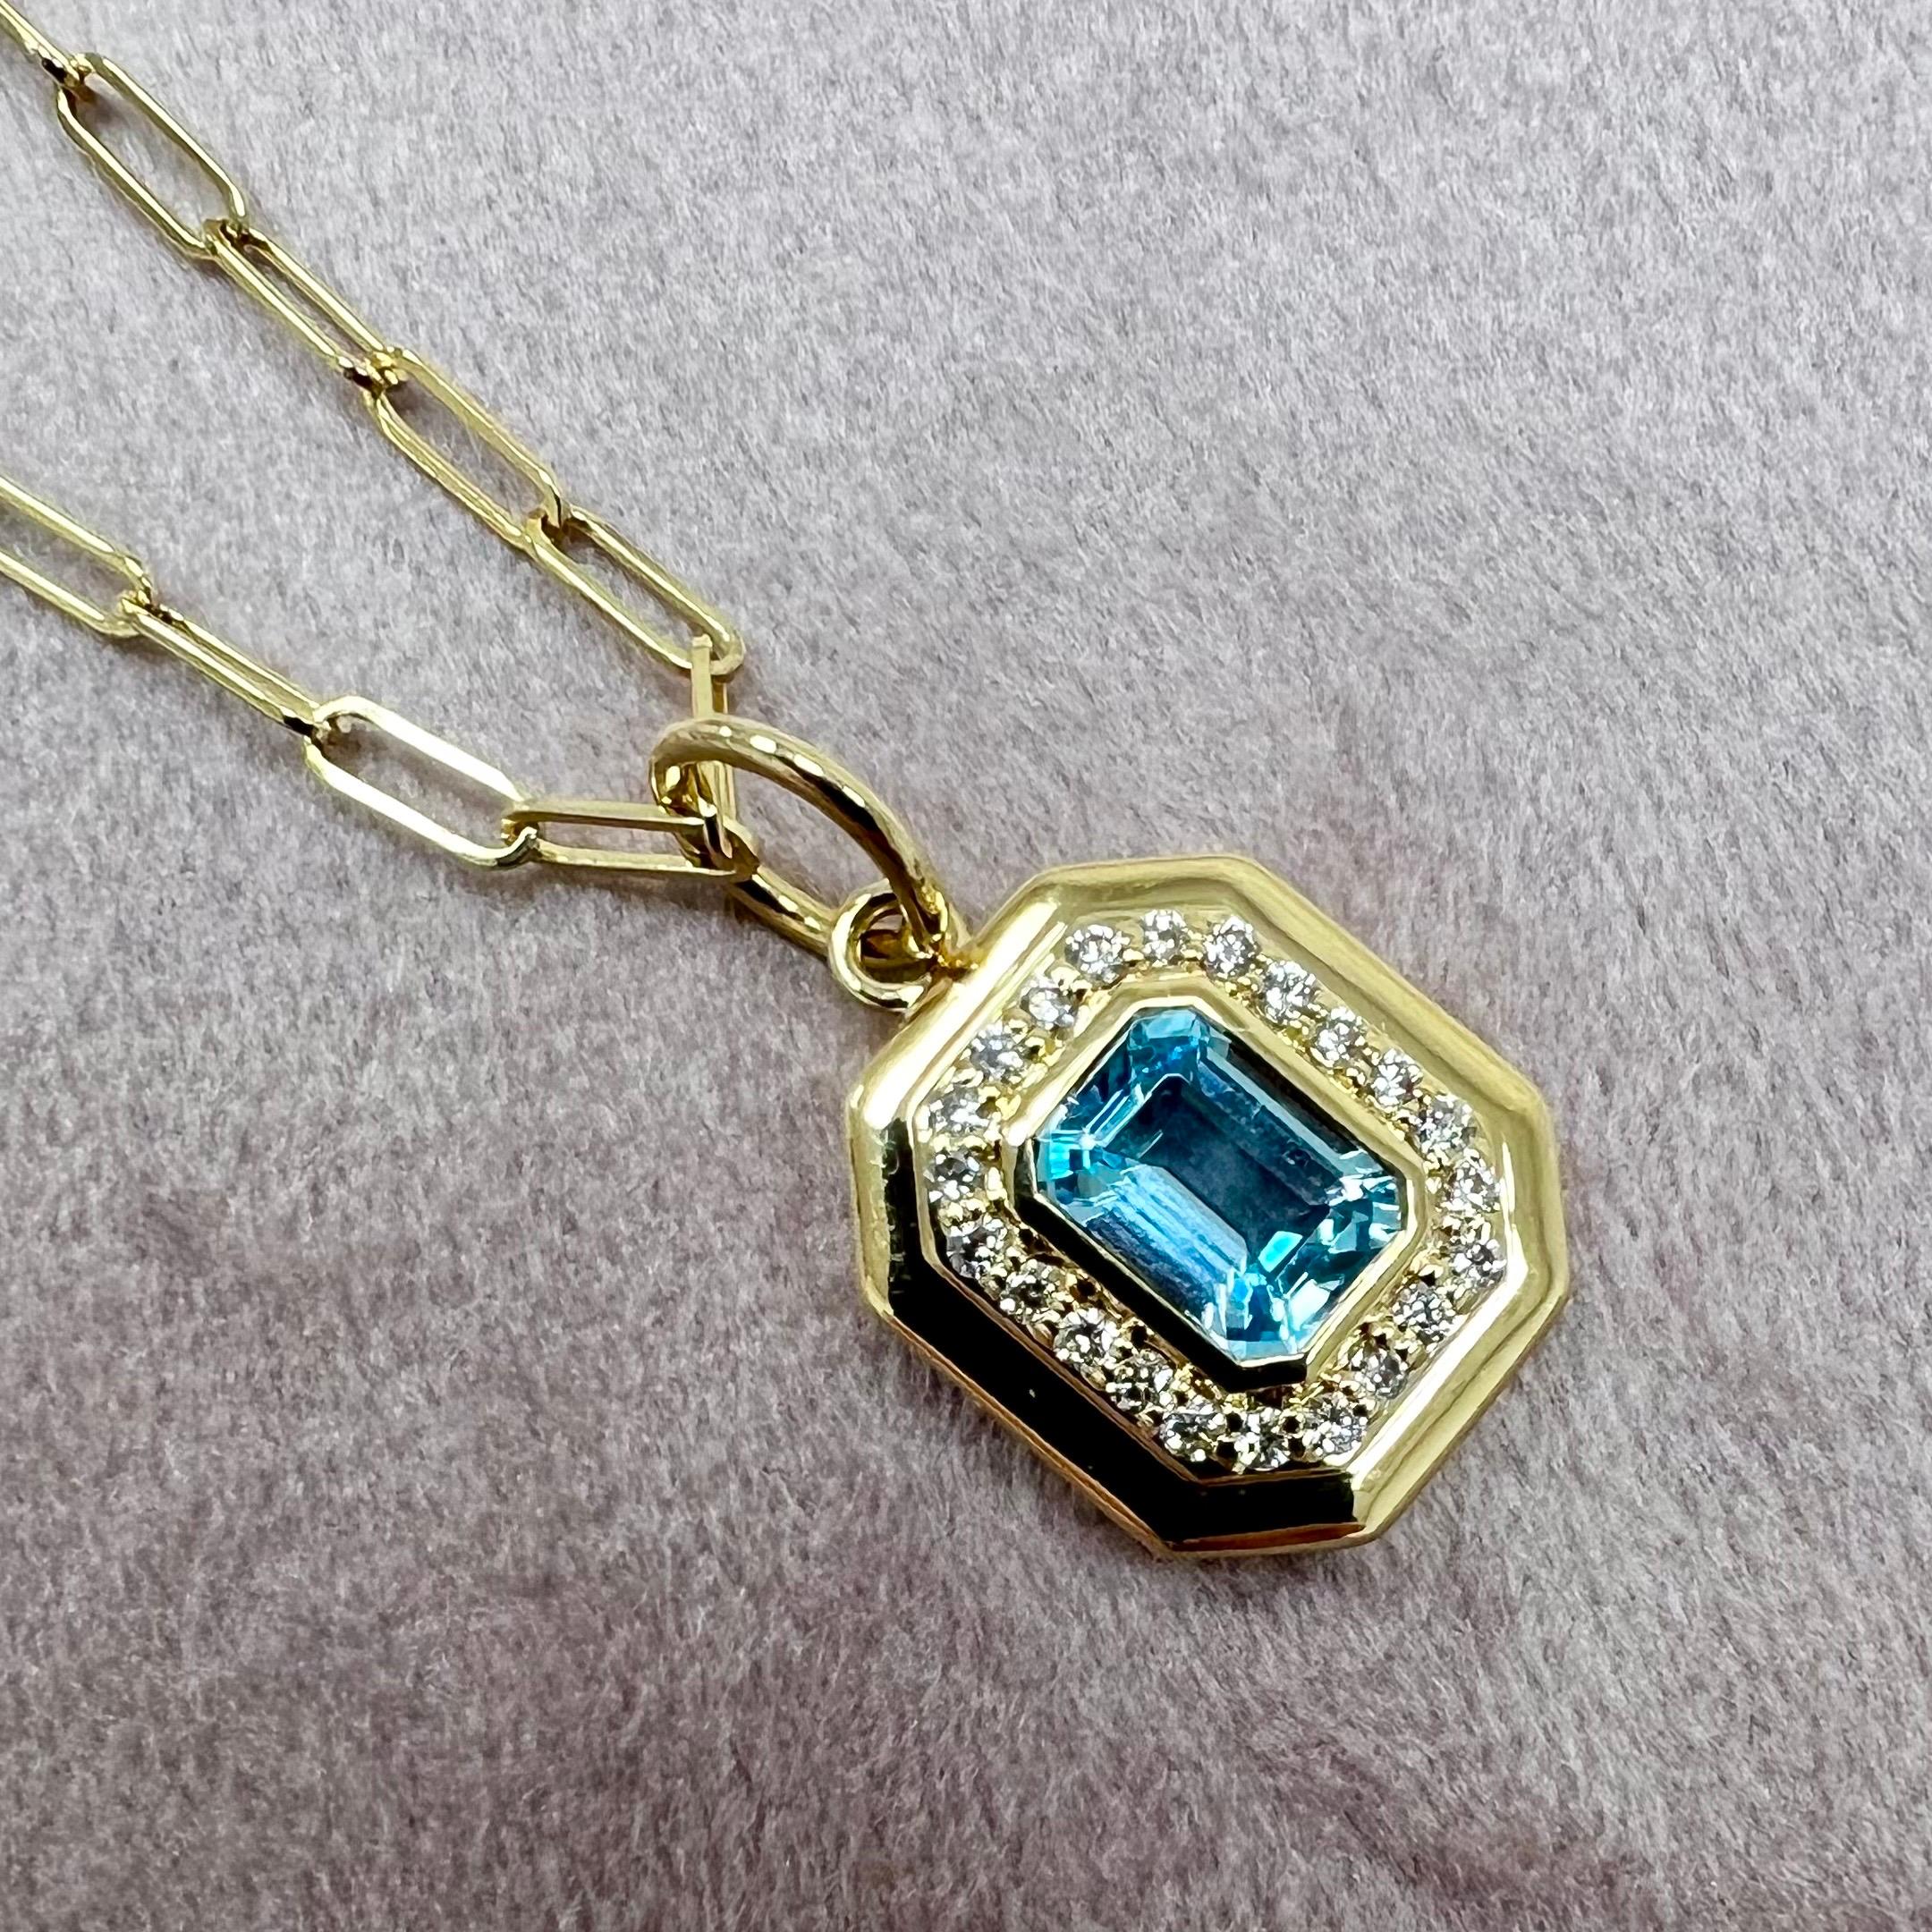 Created in 18 karat yellow gold
Blue topaz 1.10 carats approx.
Diamonds 0.22 carat approx.
Chain sold separately


 About the Designers ~ Dharmesh & Namrata

Drawing inspiration from little things, Dharmesh & Namrata Kothari have created an